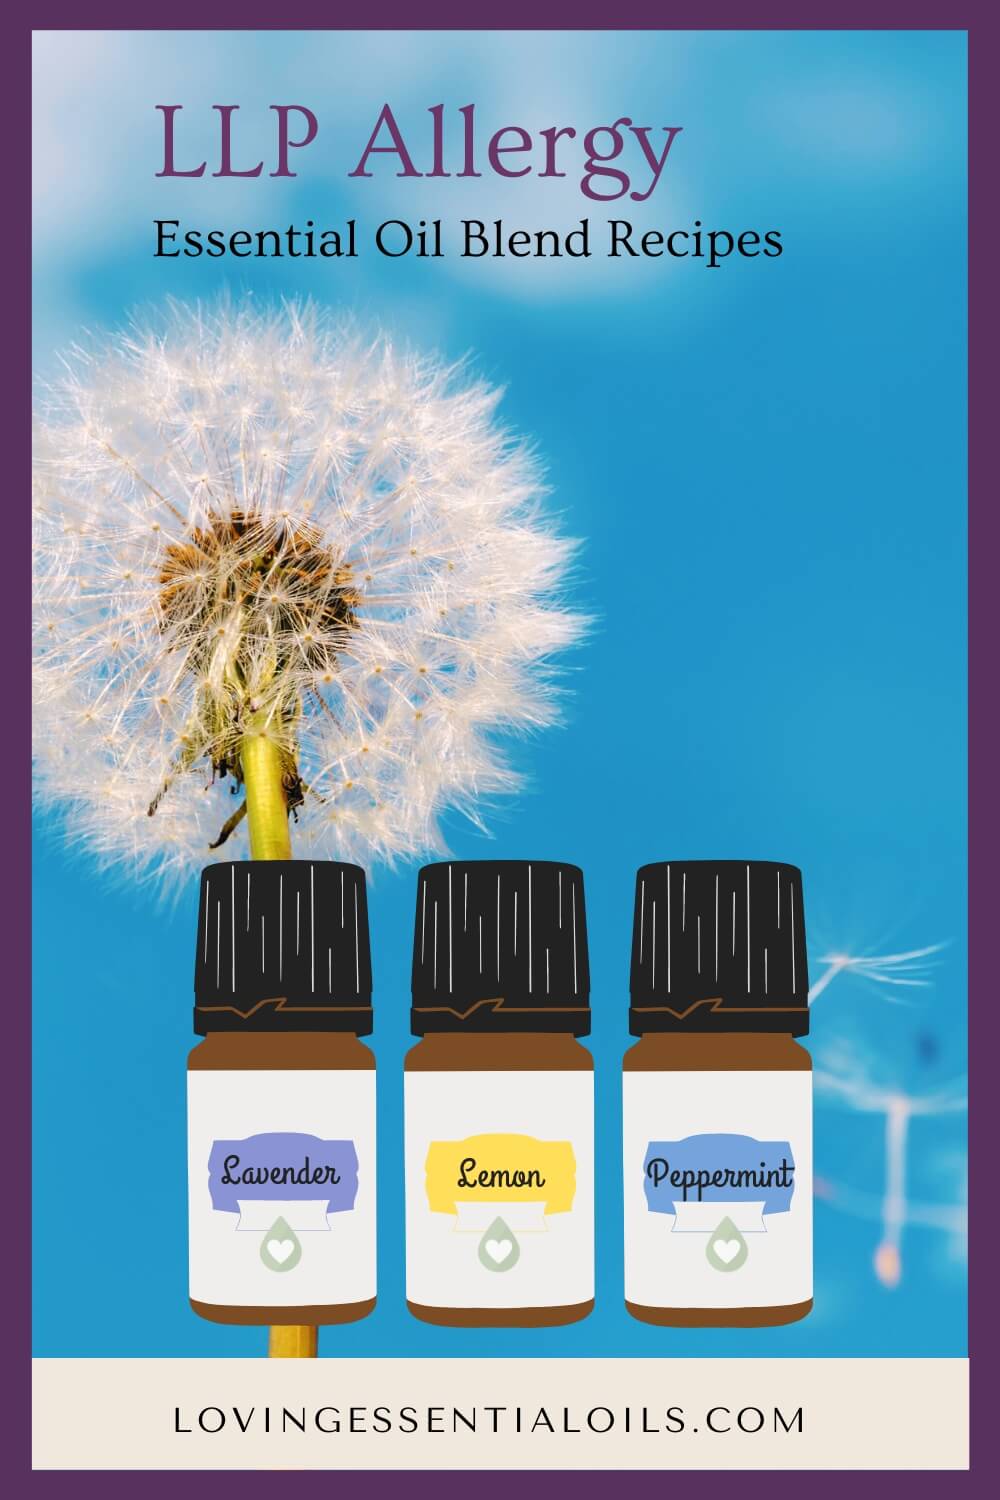 LLP Allergy essential oil blend recipes by Loving Essential Oils